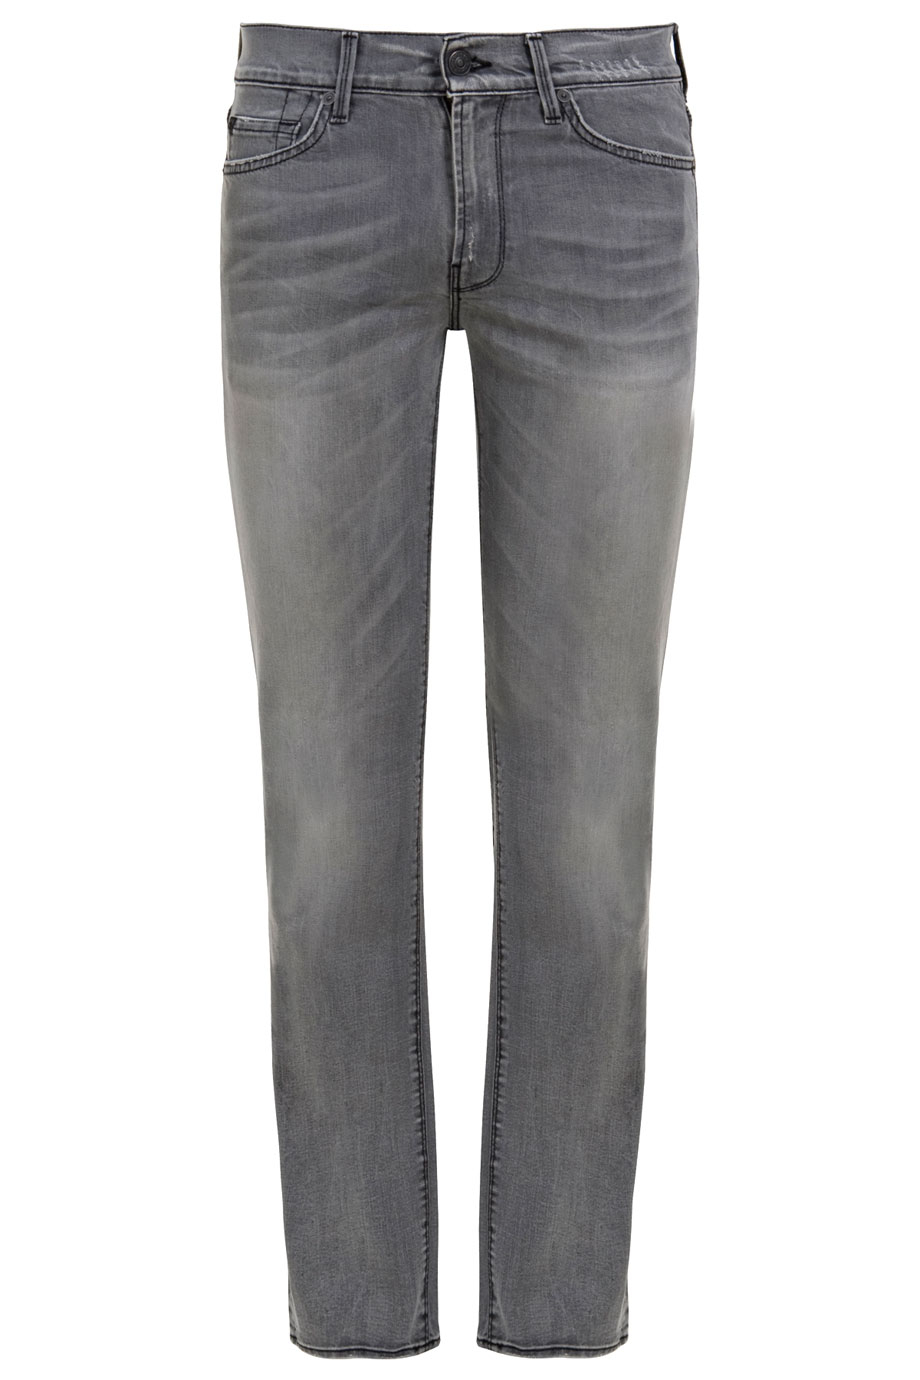 7 for all mankind Slimmy Jeans in Gray for Men (grey) | Lyst